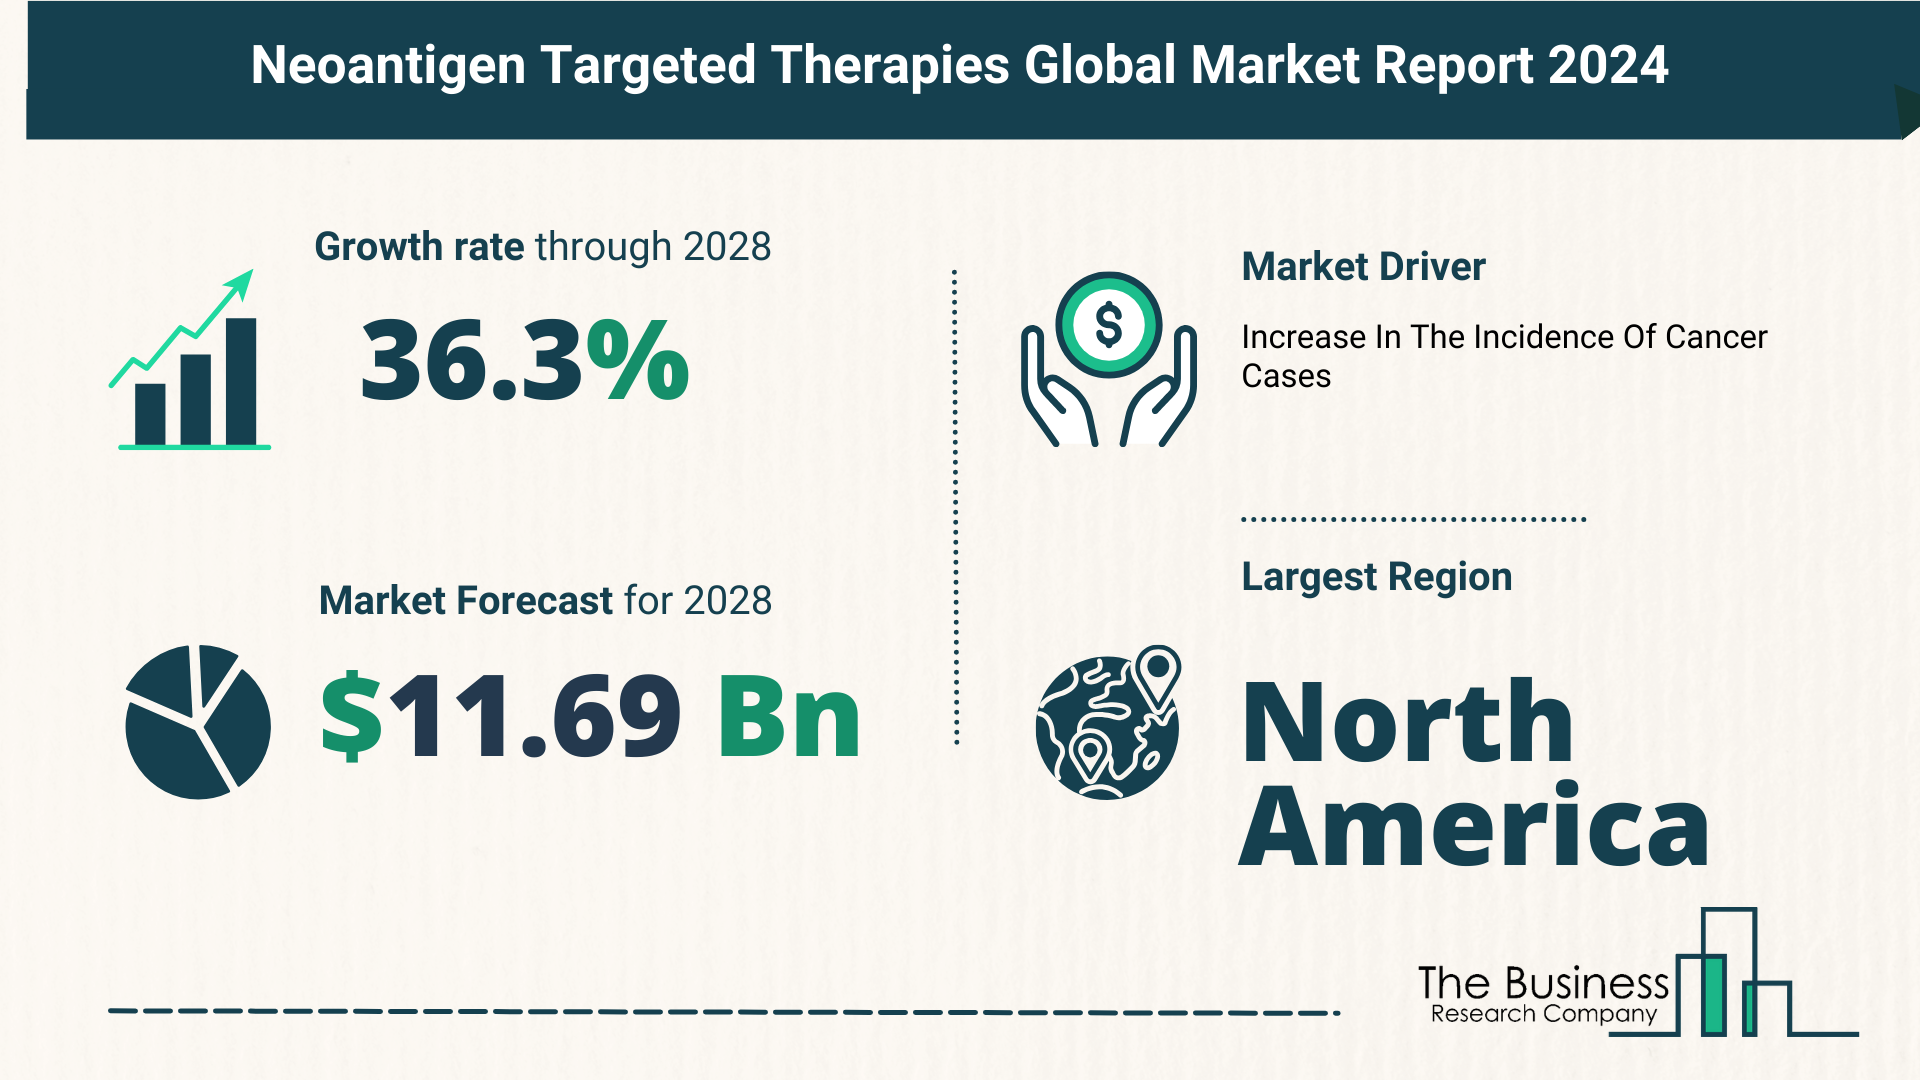 Key Trends And Drivers In The Neoantigen Targeted Therapies Market 2024